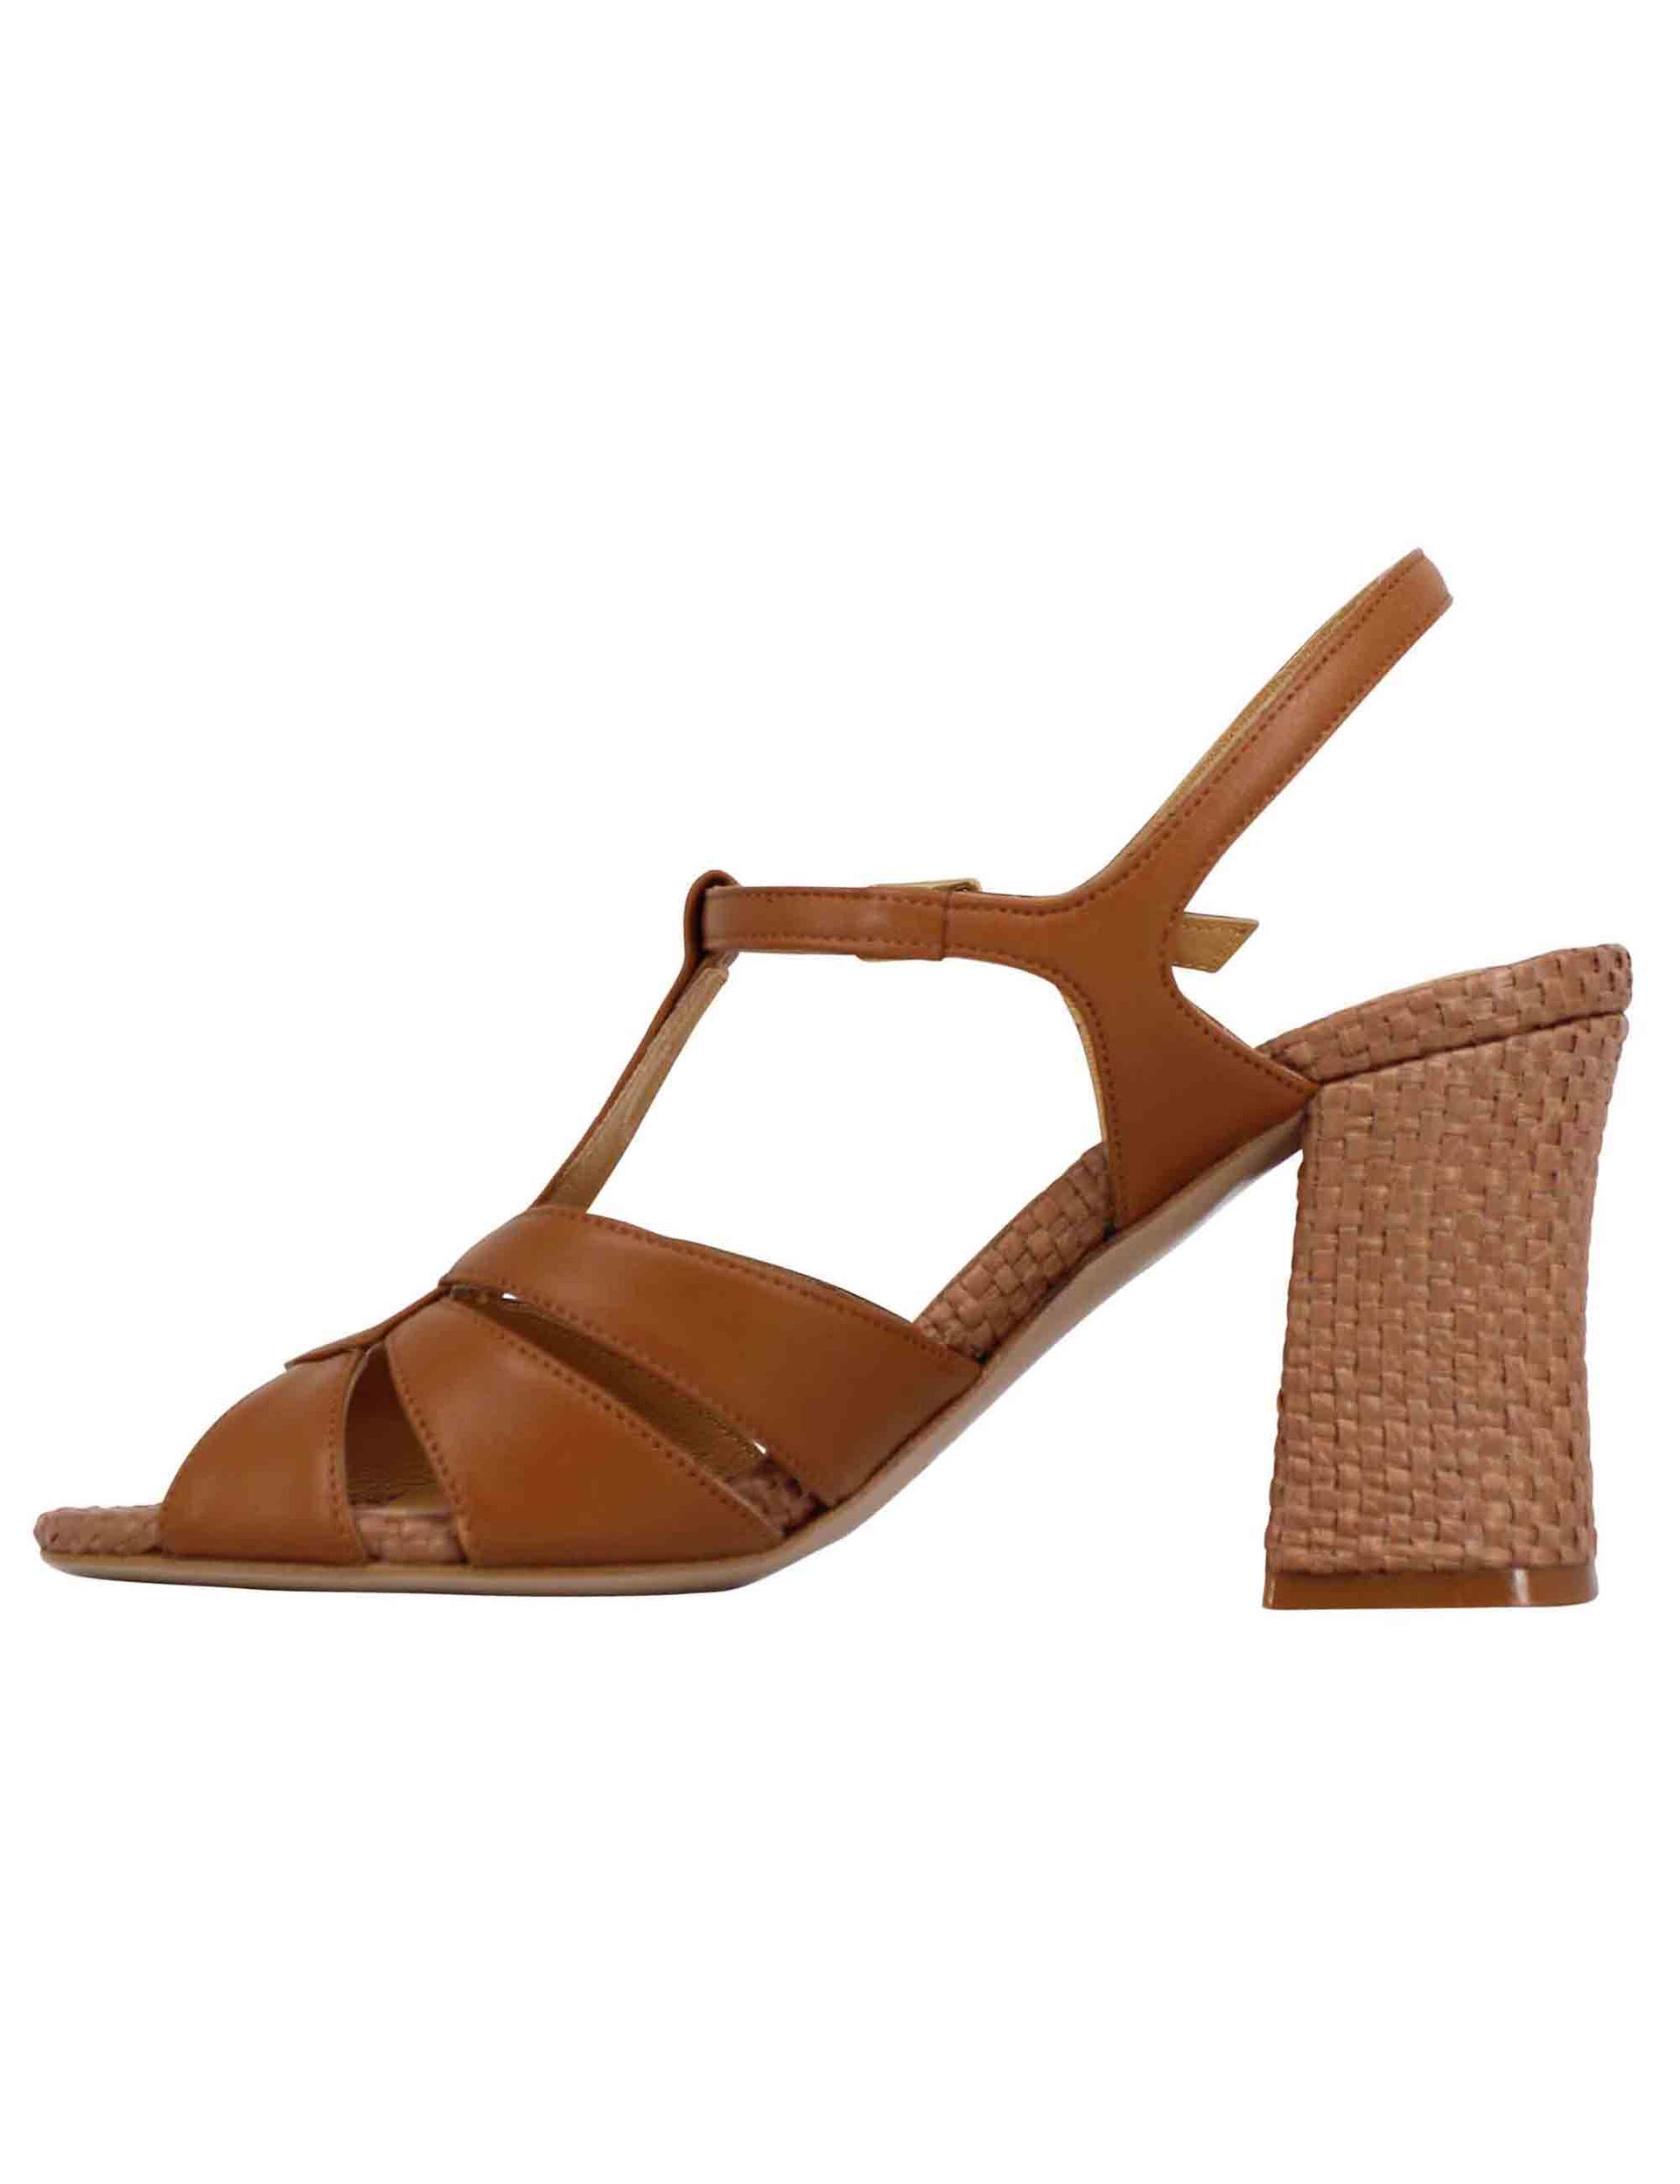 Women's slingback sandals in tan leather with high heel